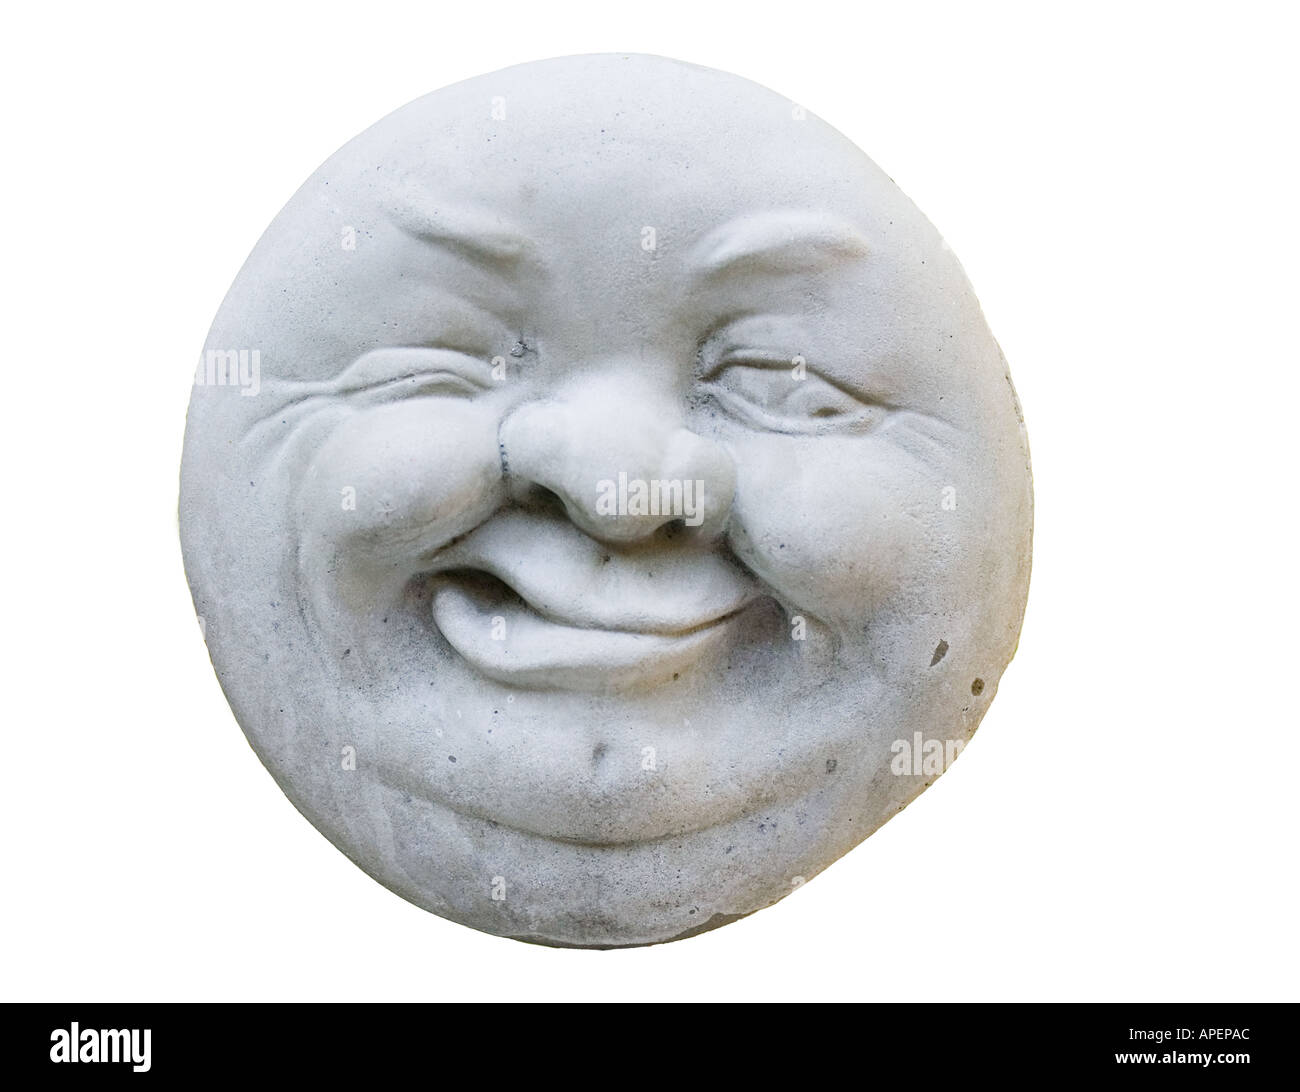 Man in the moon sculpture Stock Photo